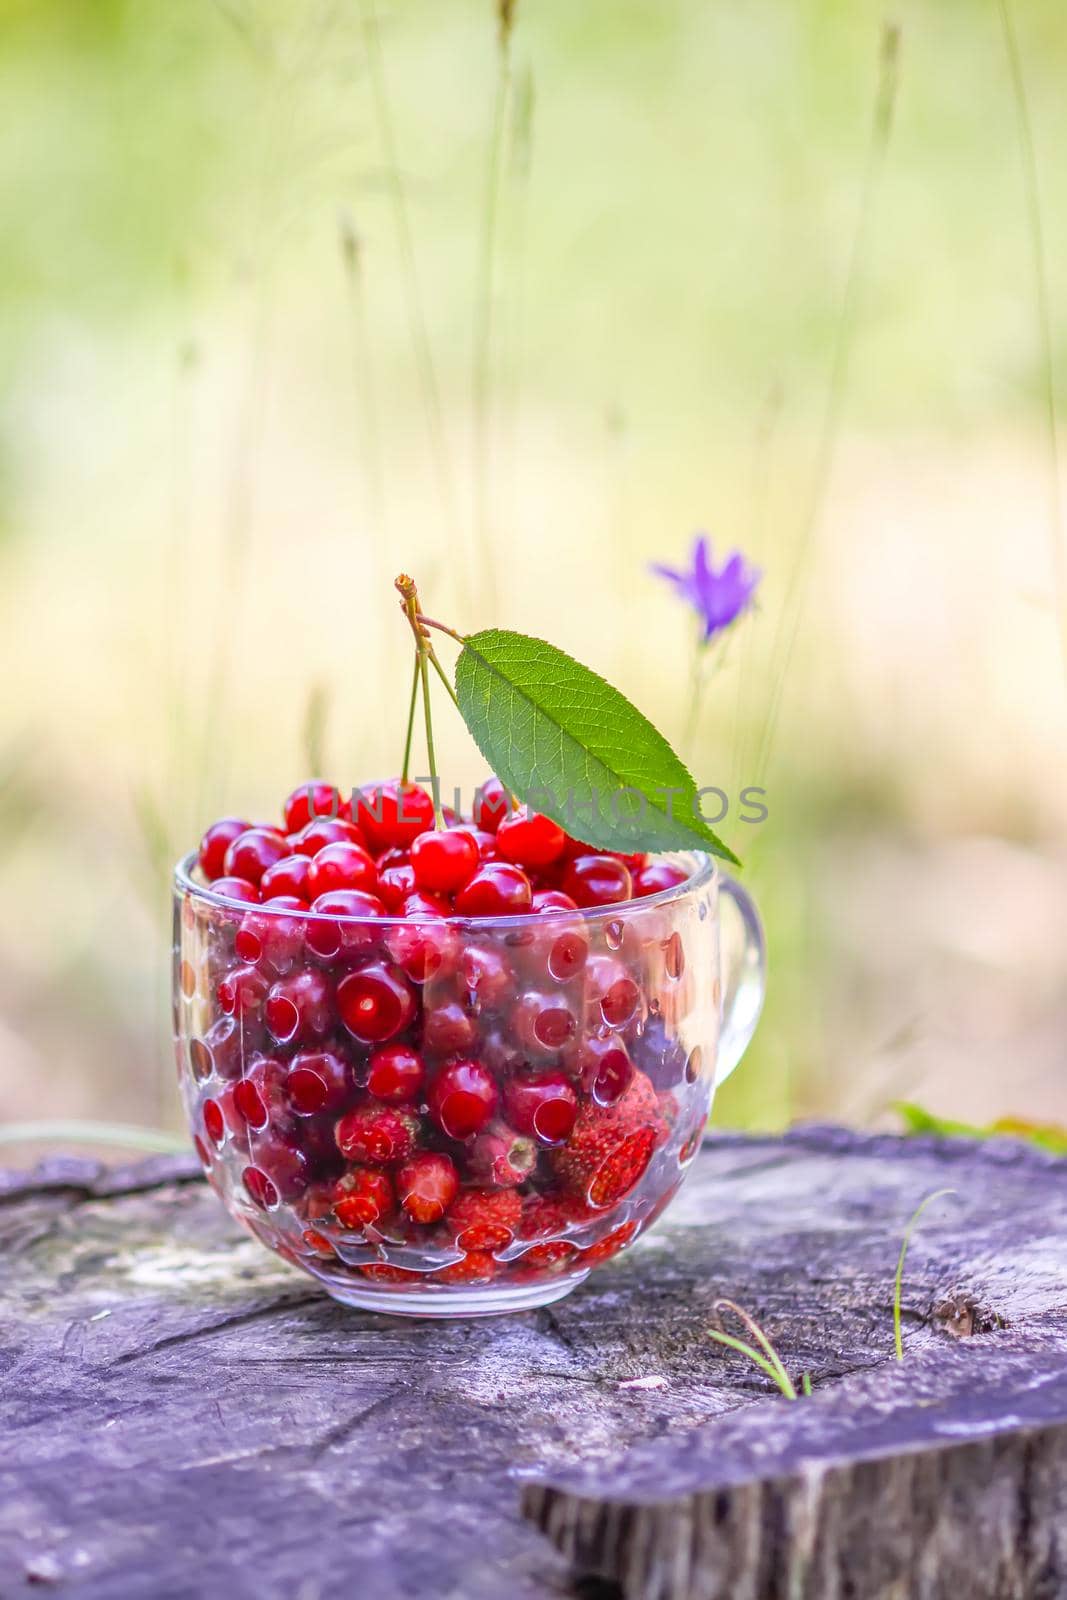 Ripe cherries and strawberries in a transparent cup on tree stump. Fresh red fruits in summer garden. by nightlyviolet